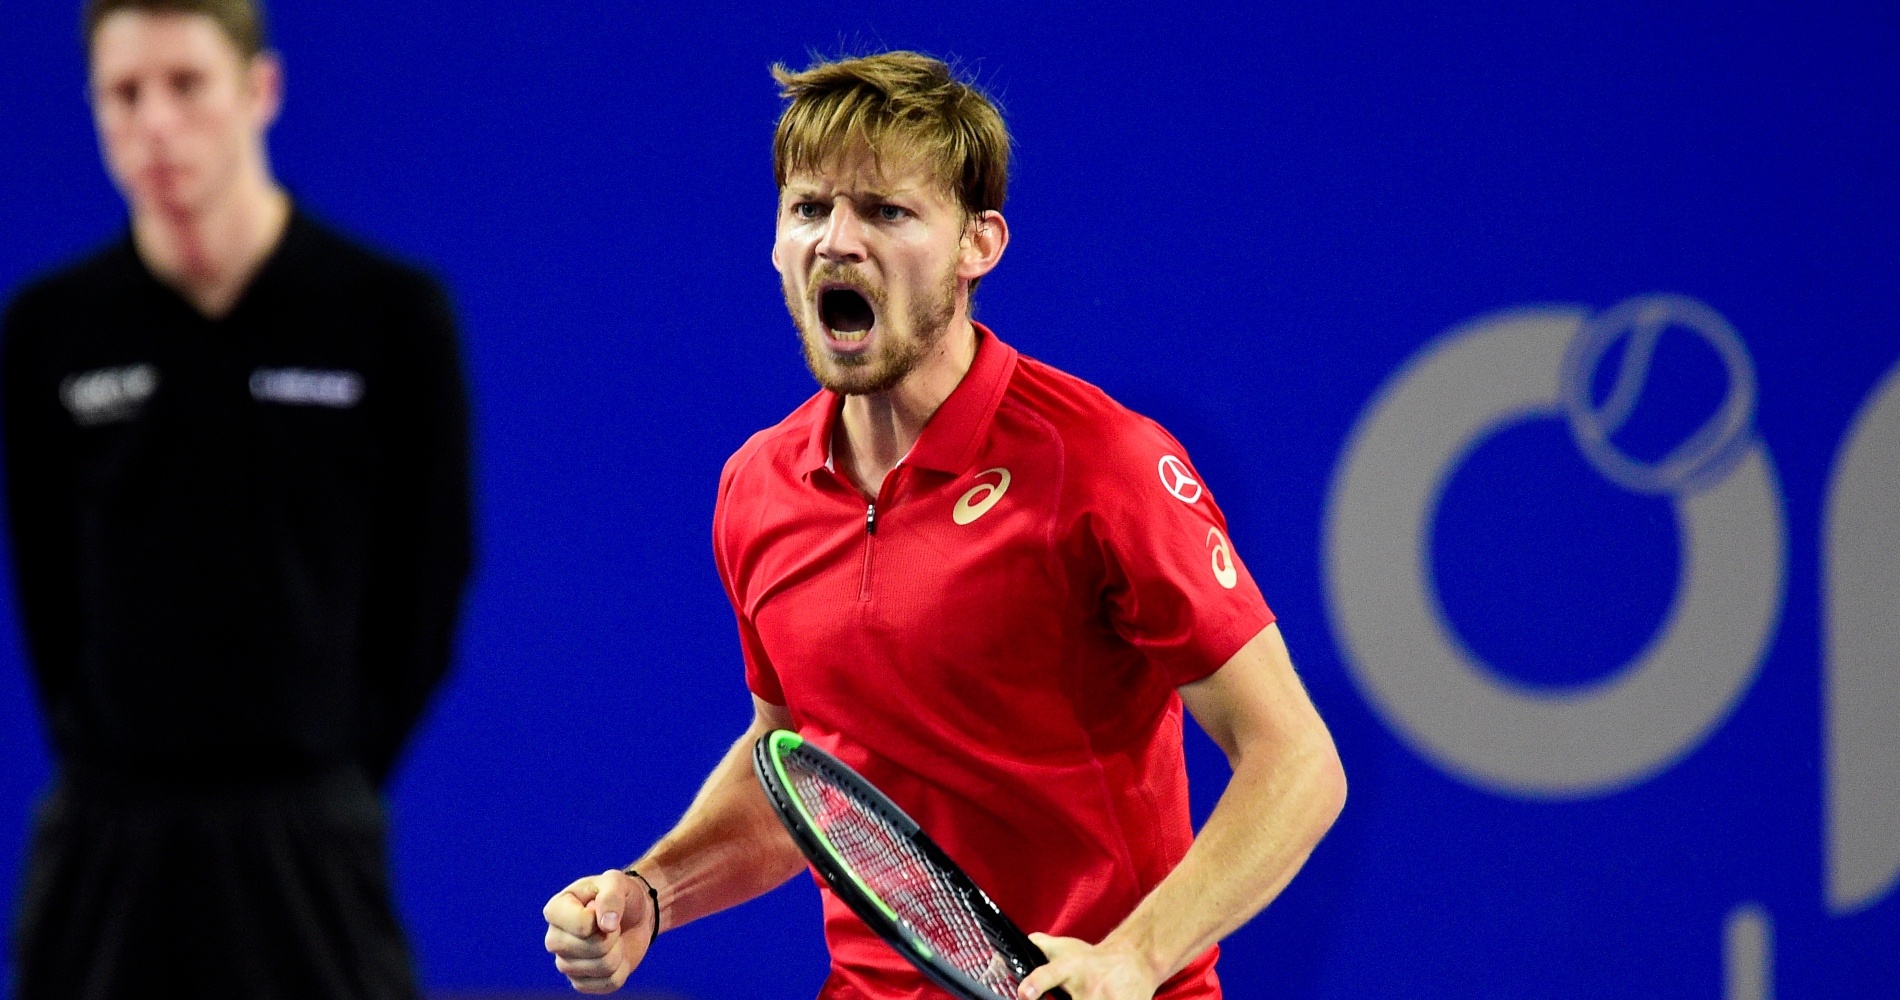 David Goffin Wallpapers